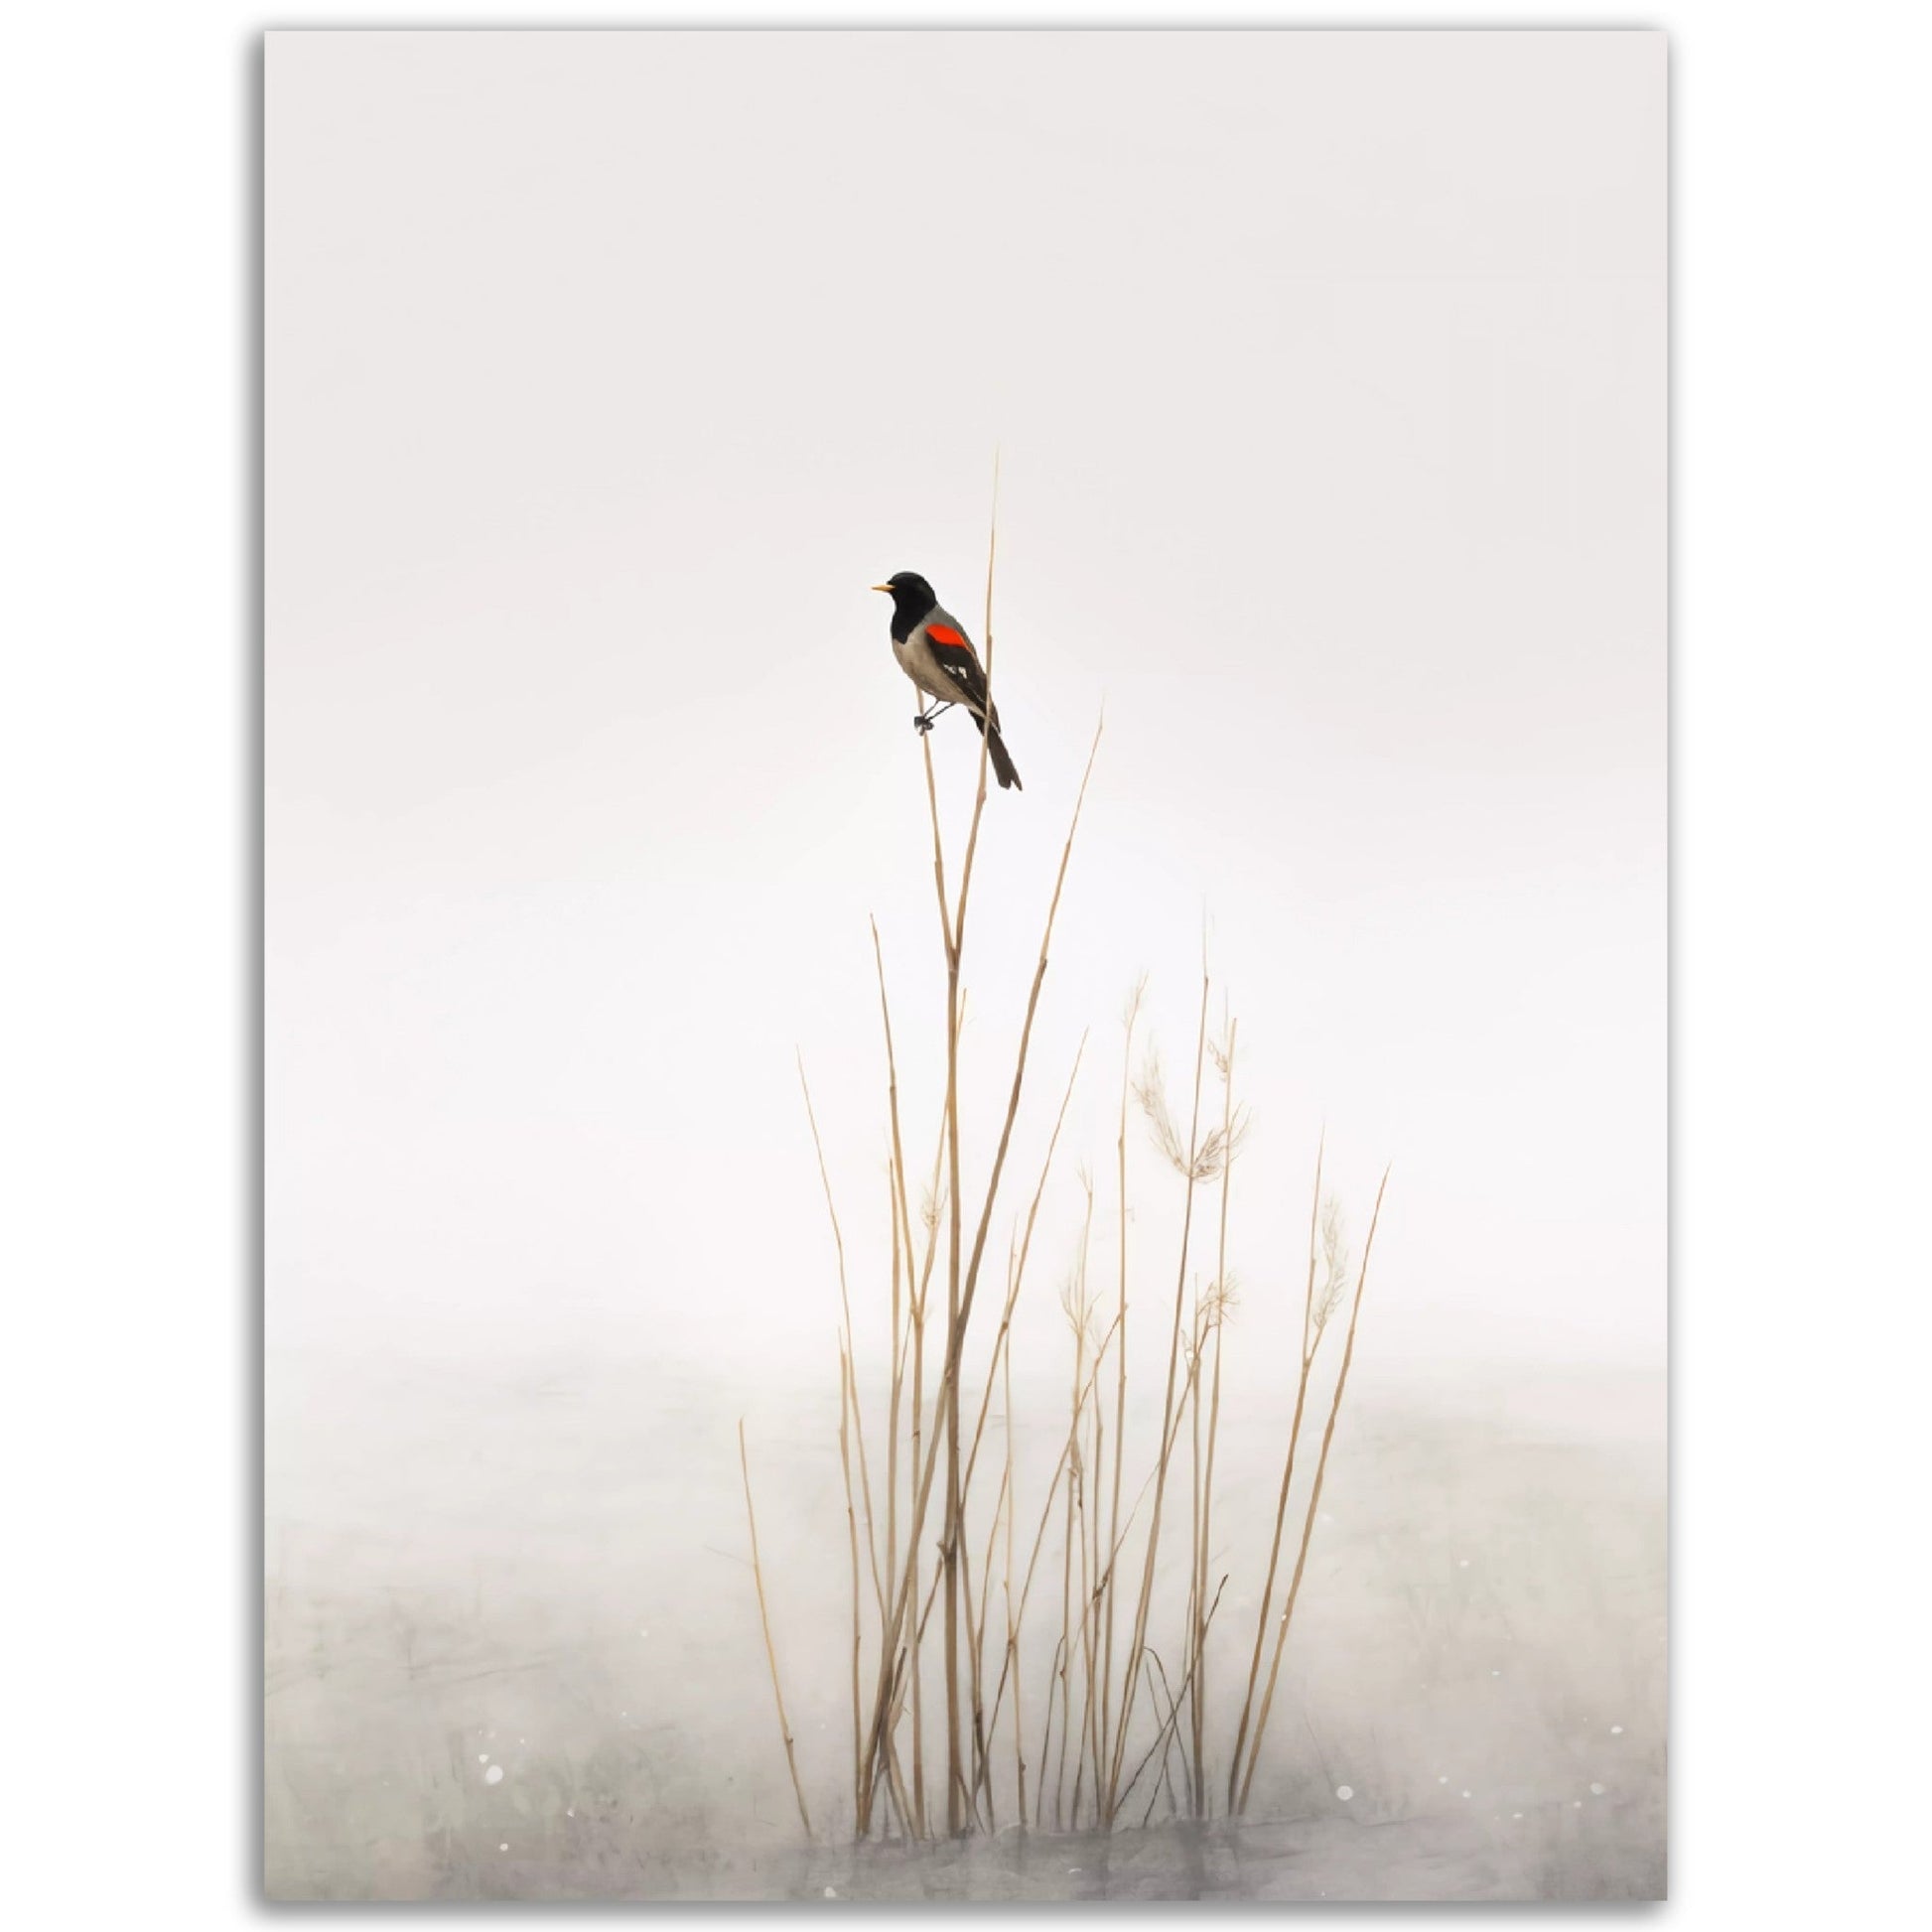 A bird perched on top of reeds, creating a captivating Bird In Fog Wall Art in the fog.